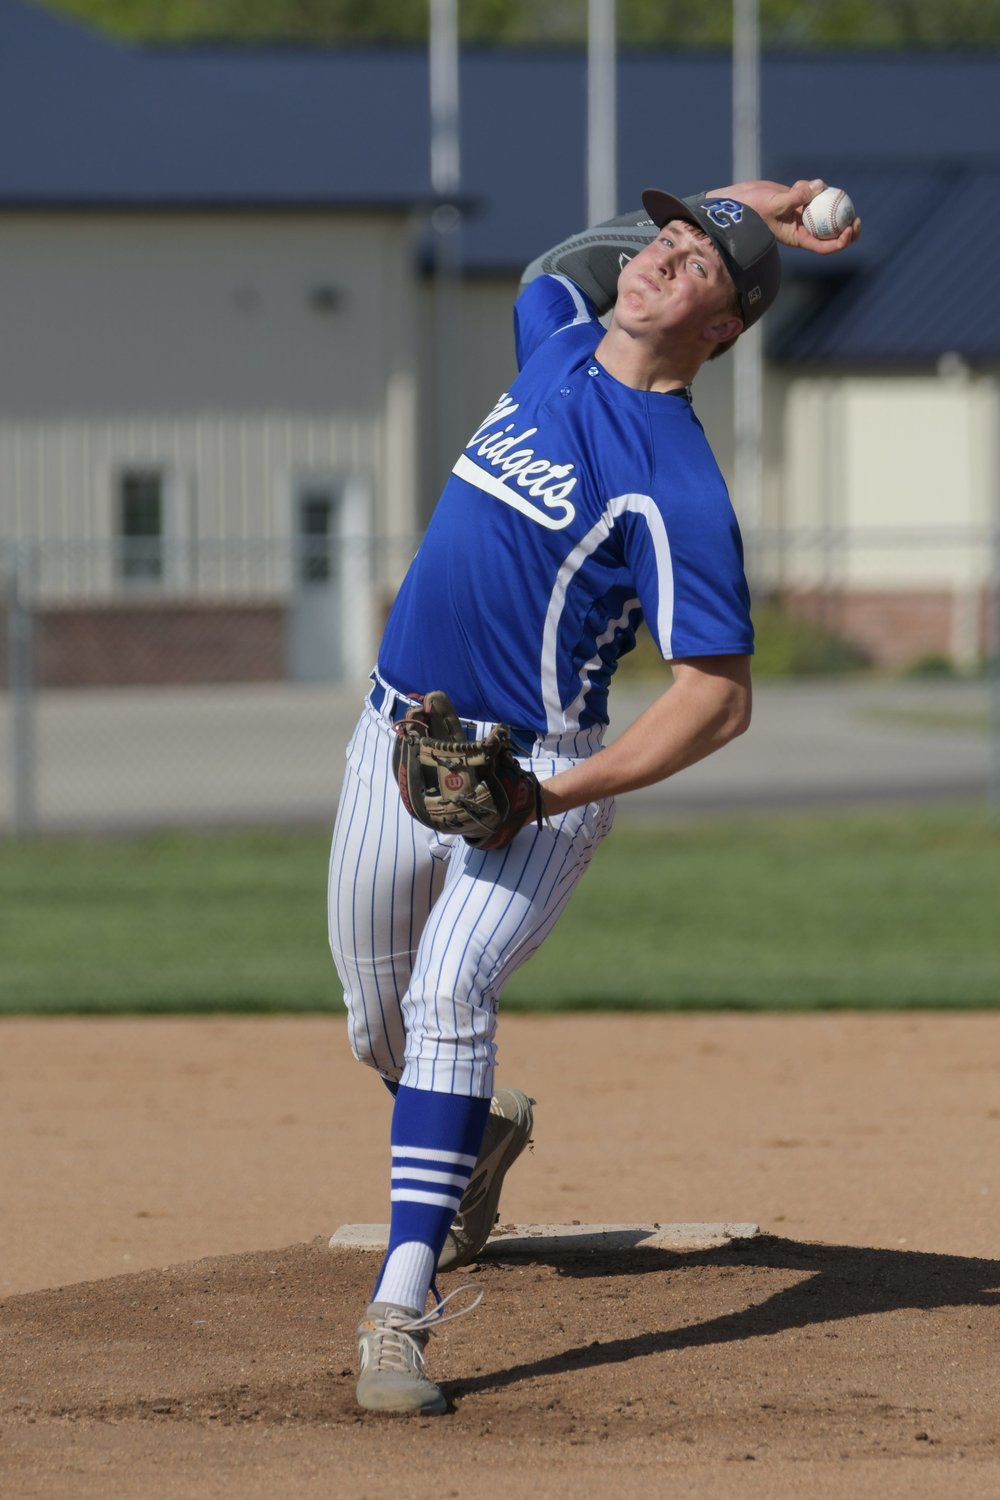 Putnam County's Gage Pearson pitches during an April 30 game against Green City.